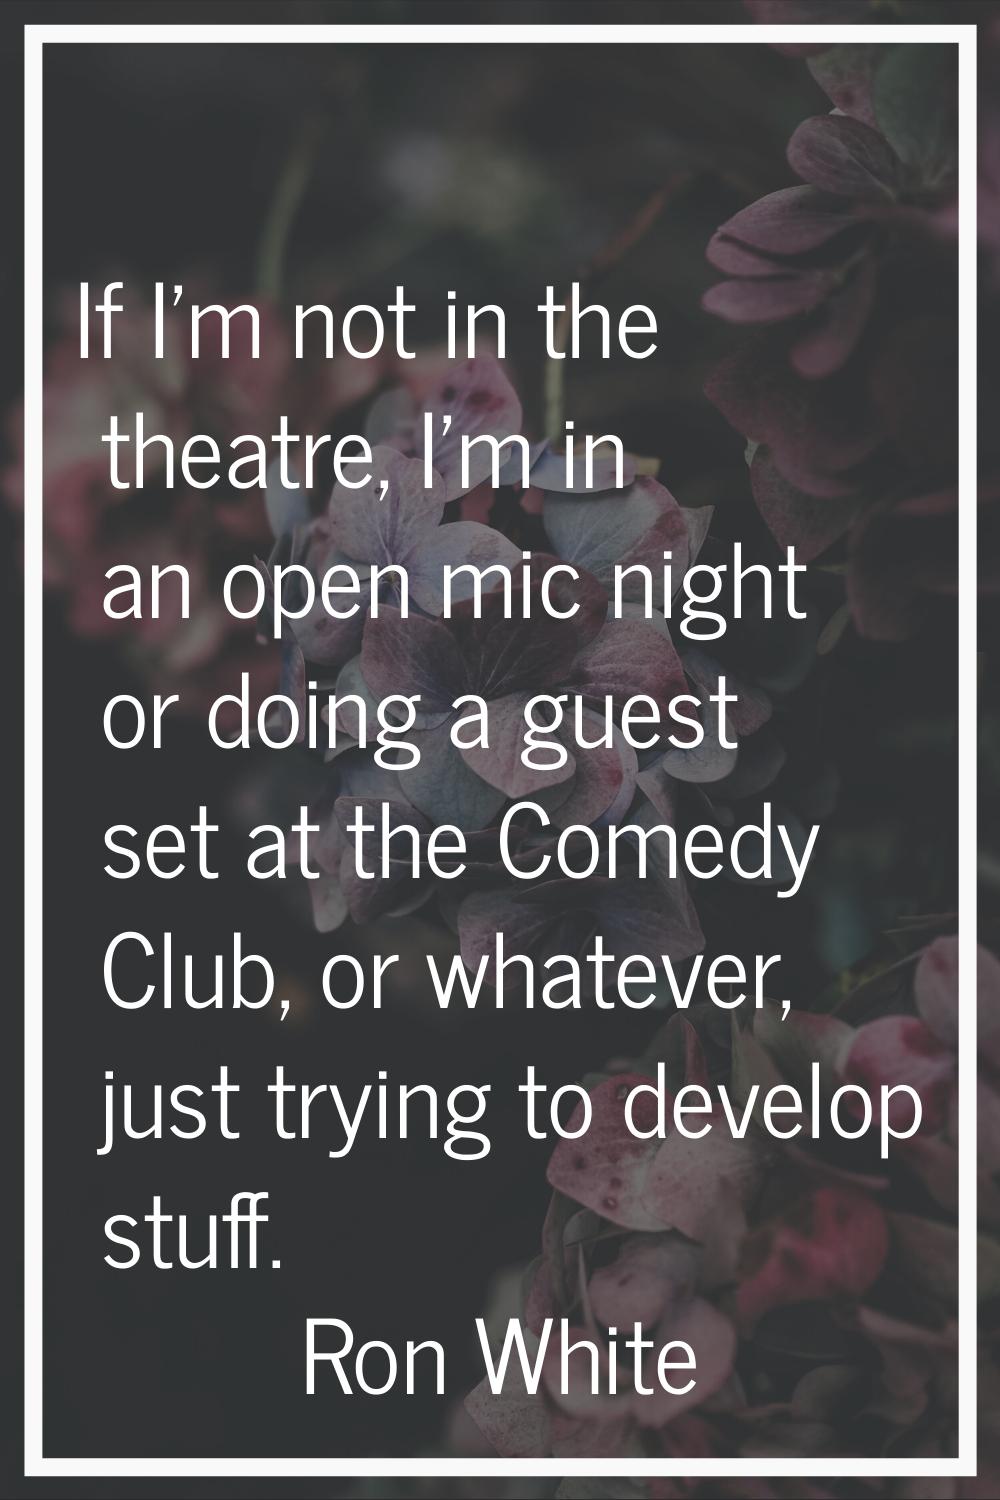 If I'm not in the theatre, I'm in an open mic night or doing a guest set at the Comedy Club, or wha